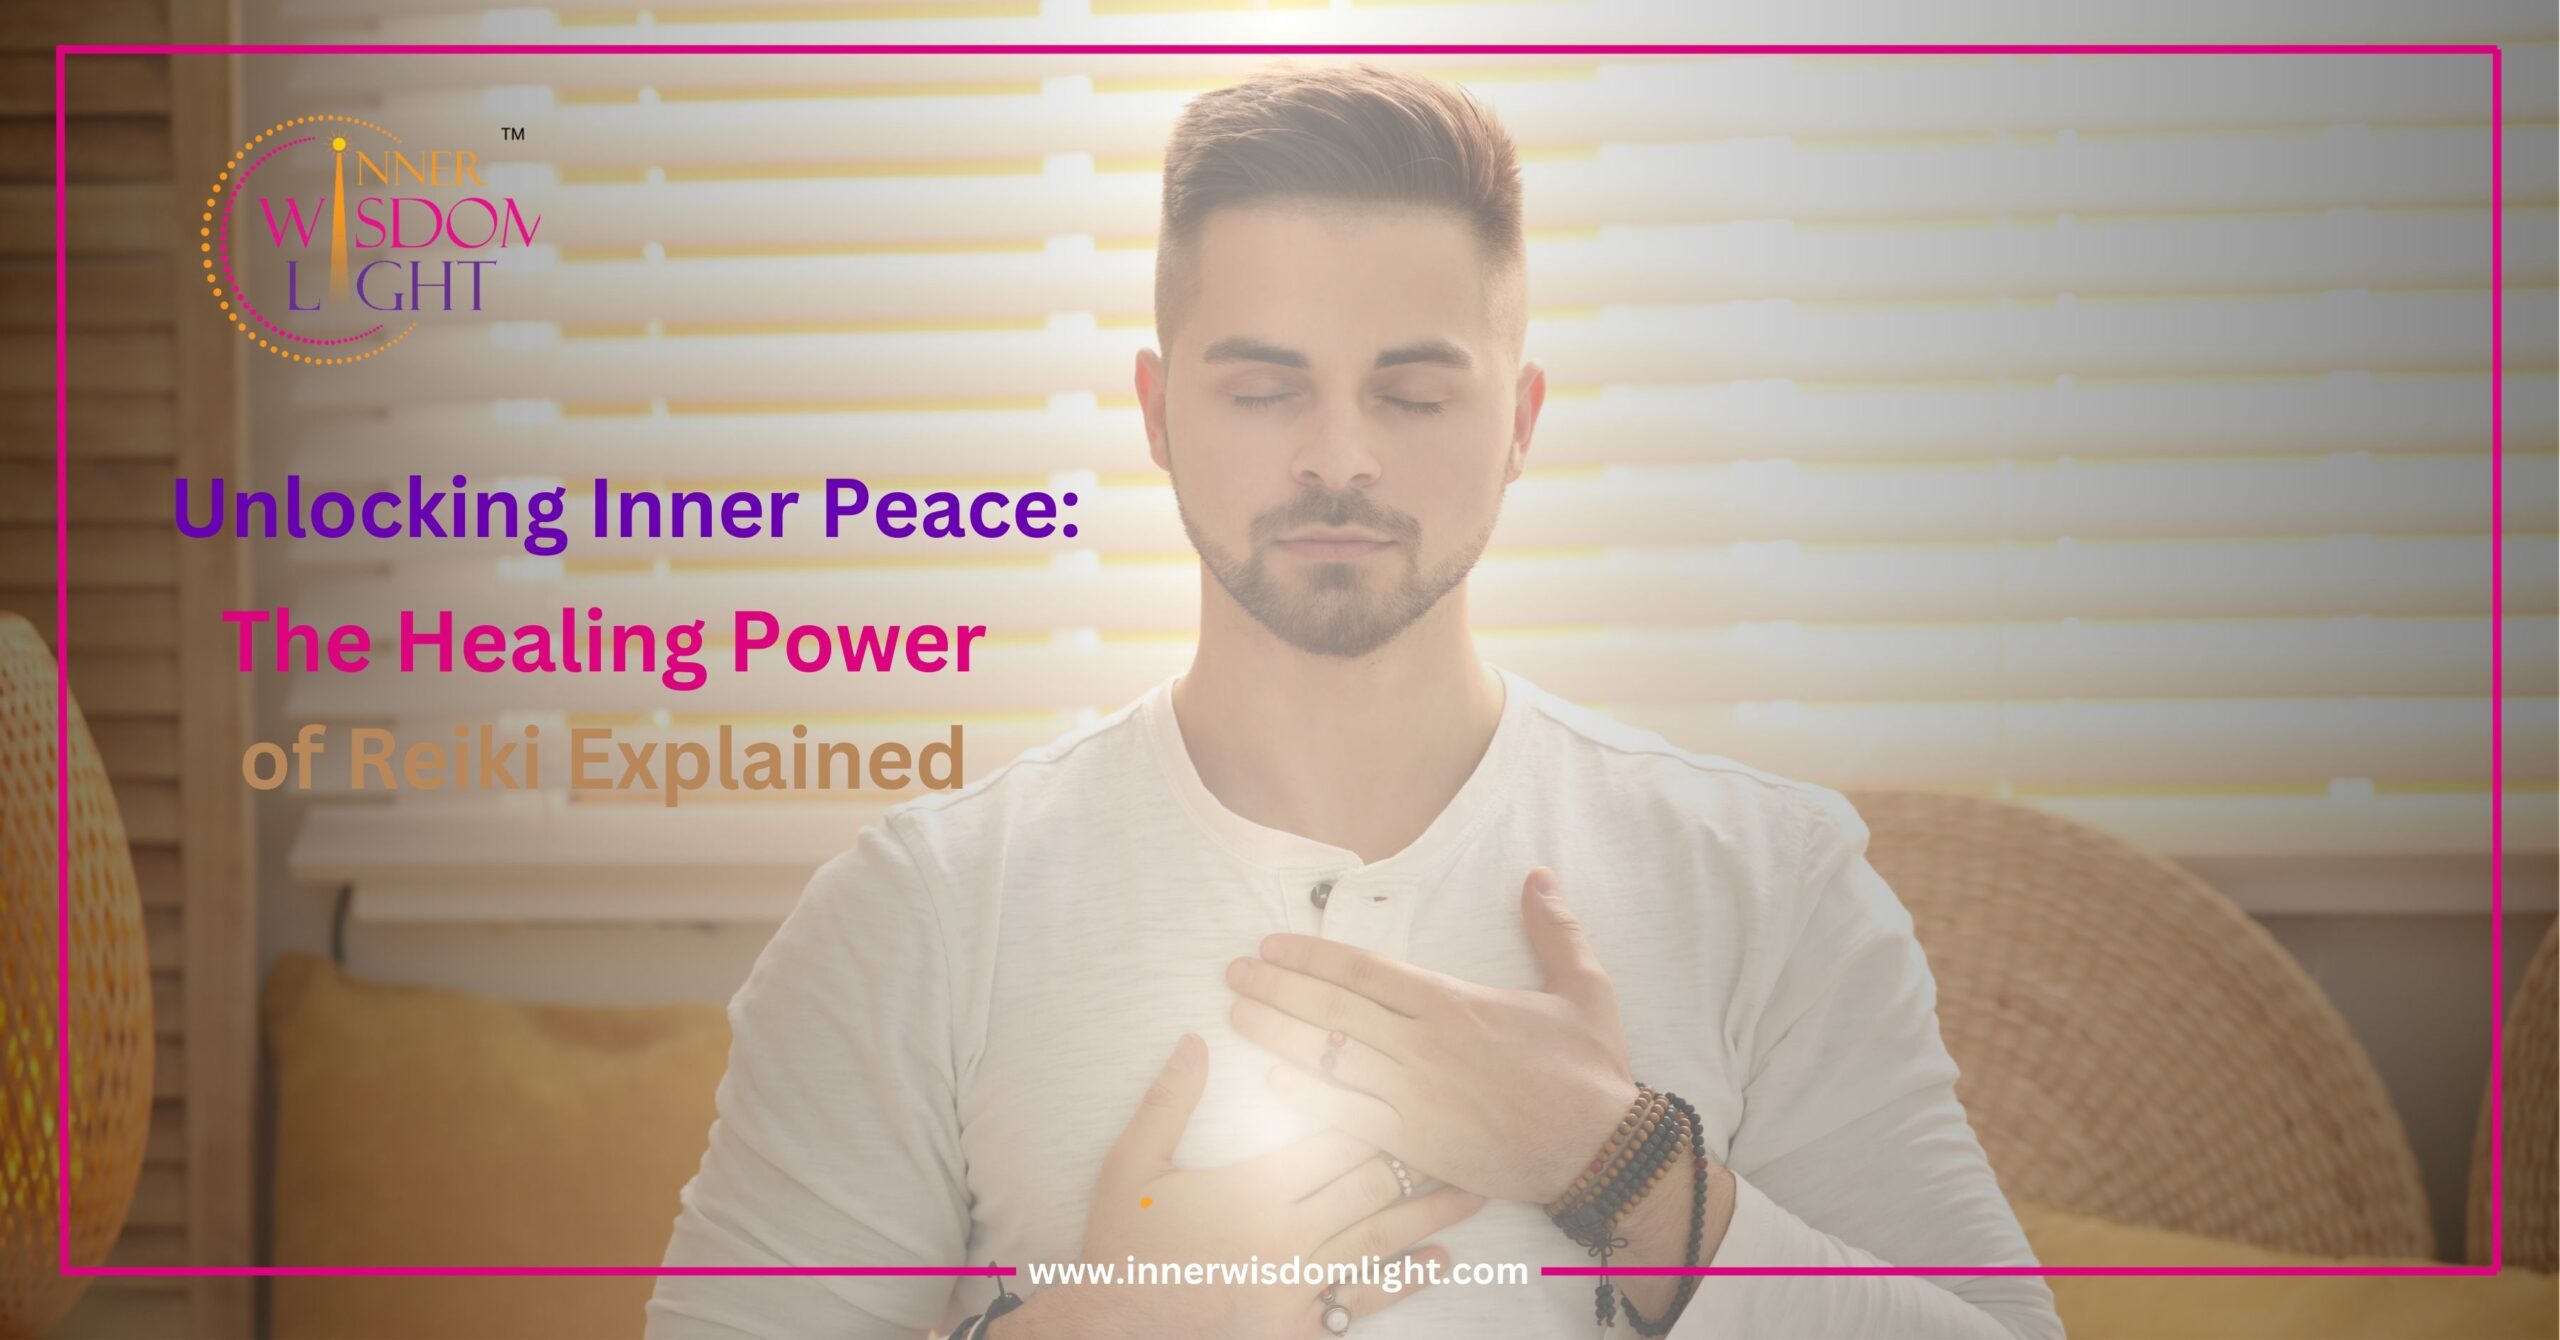 Unlocking Inner Peace text is visible and in the background of it a man is seated in meditation